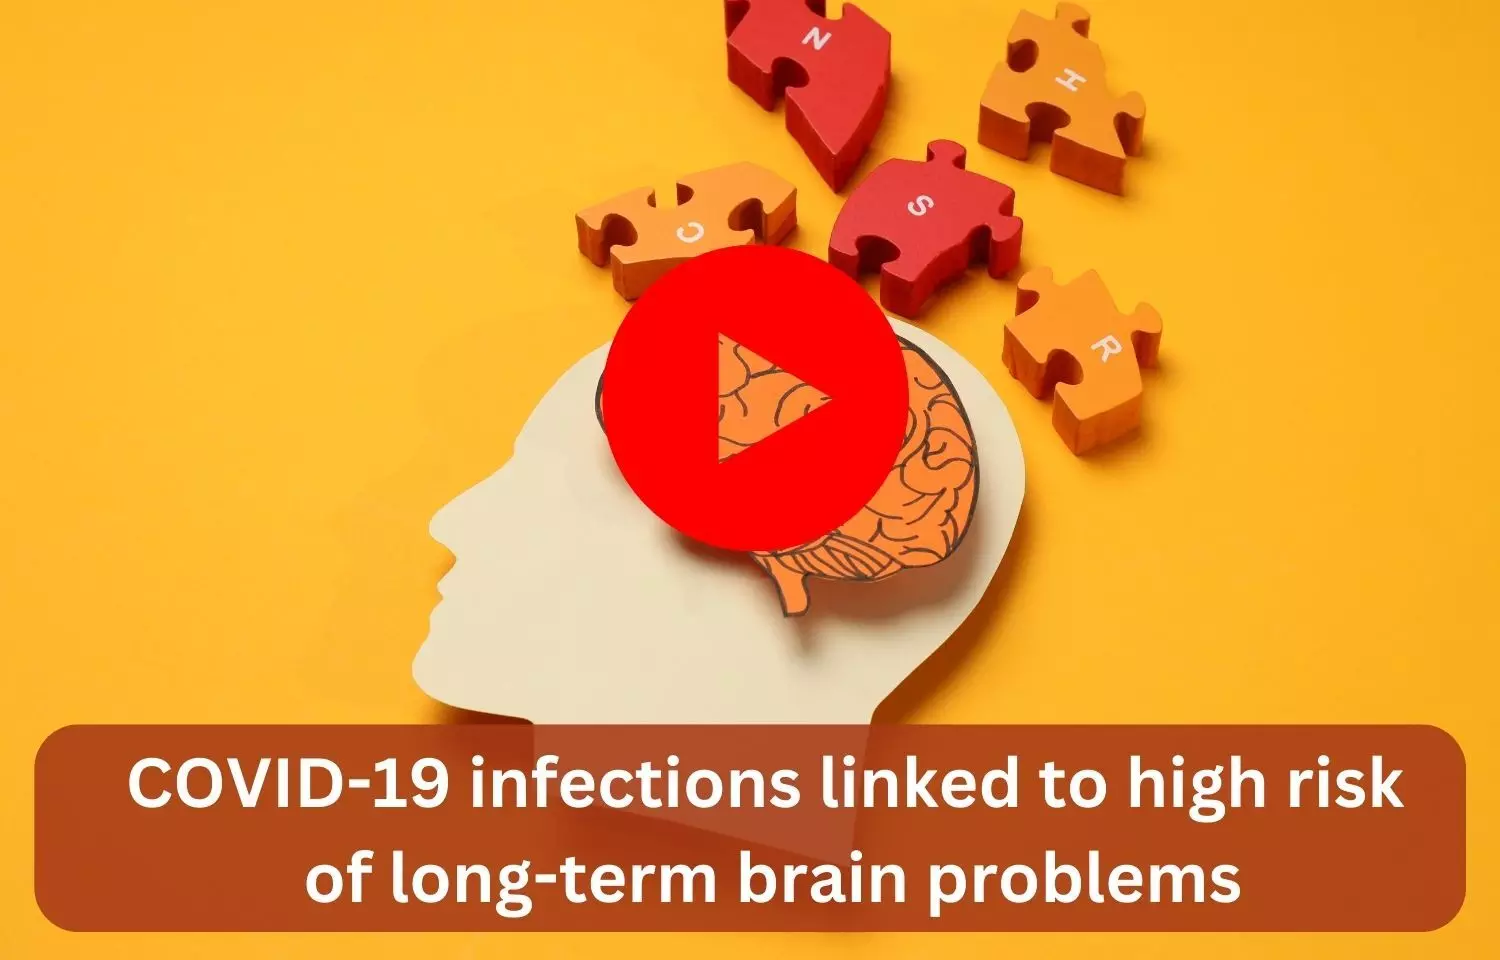 COVID-19 infections linked to high risk of long-term brain problems